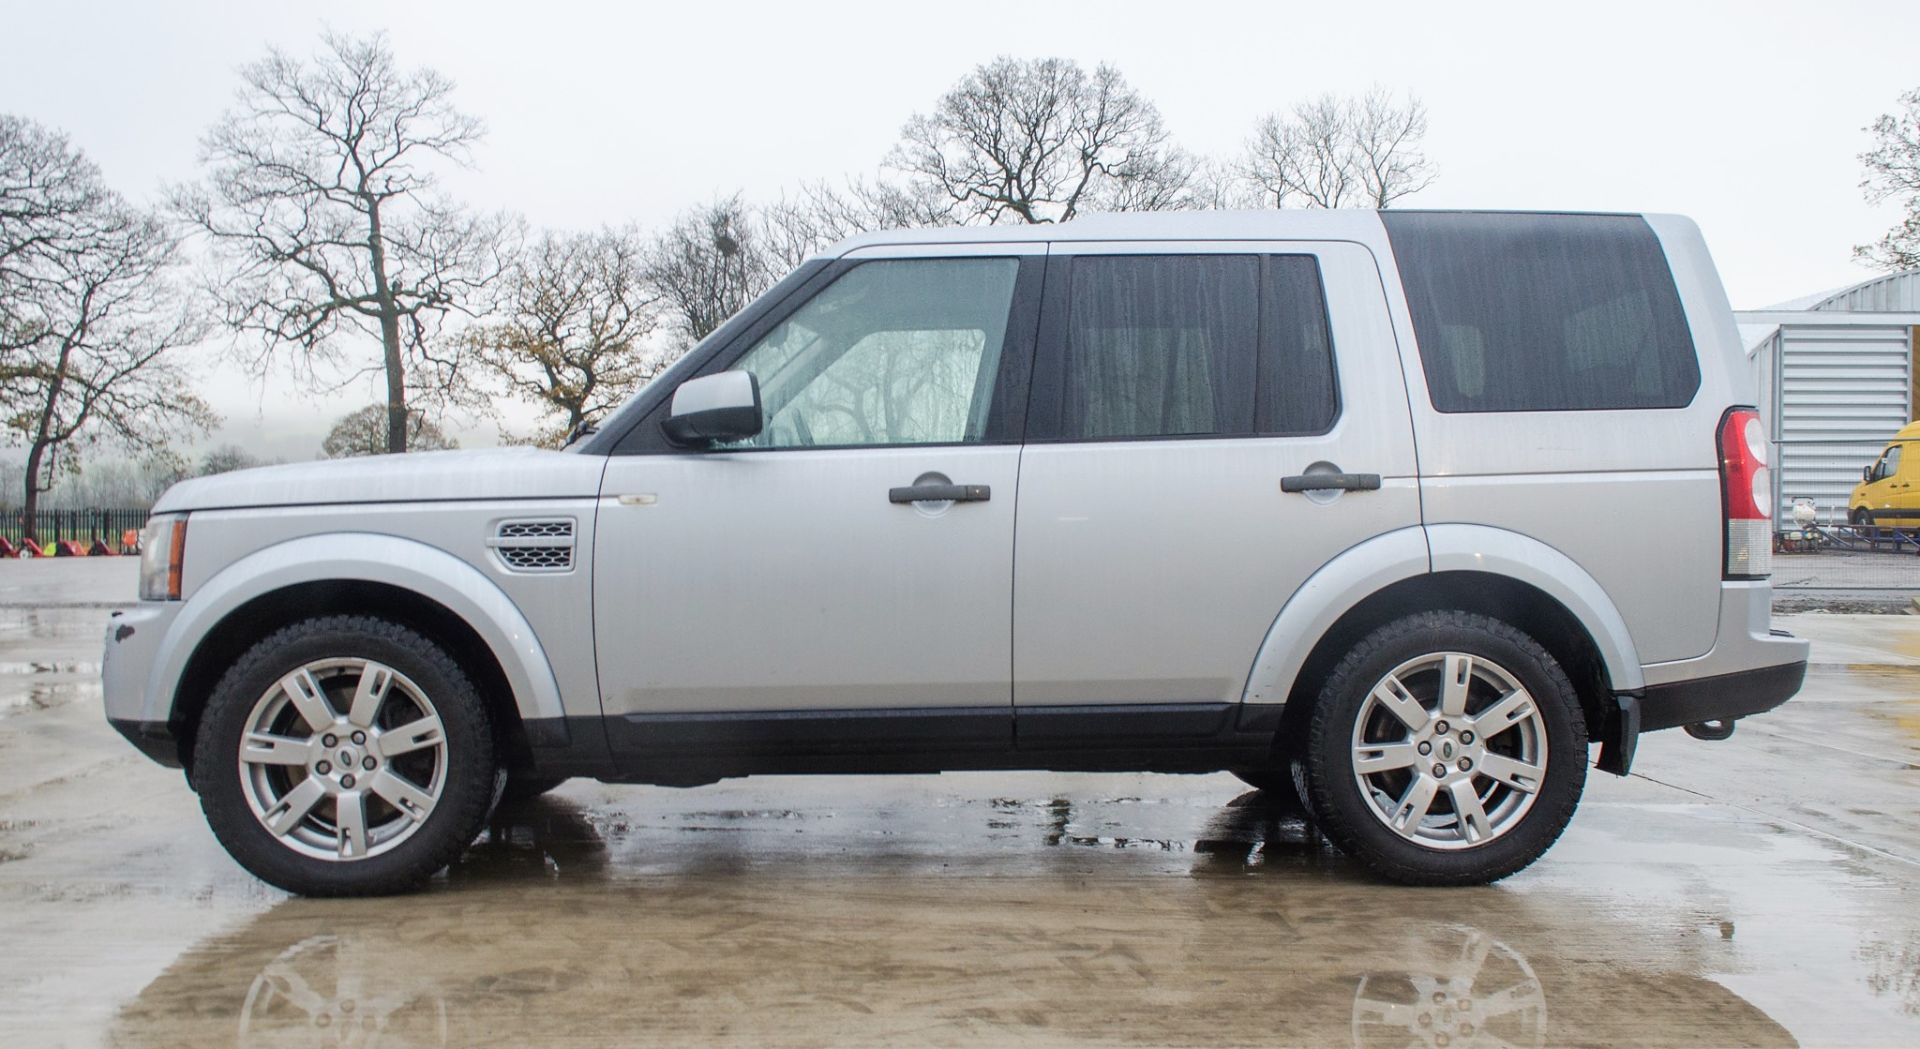 Land Rover Discovery 4 GS 3.0 TDV6 auto 5 door 4wd estate car  Registration Number: OE 11 RYH - Image 7 of 28